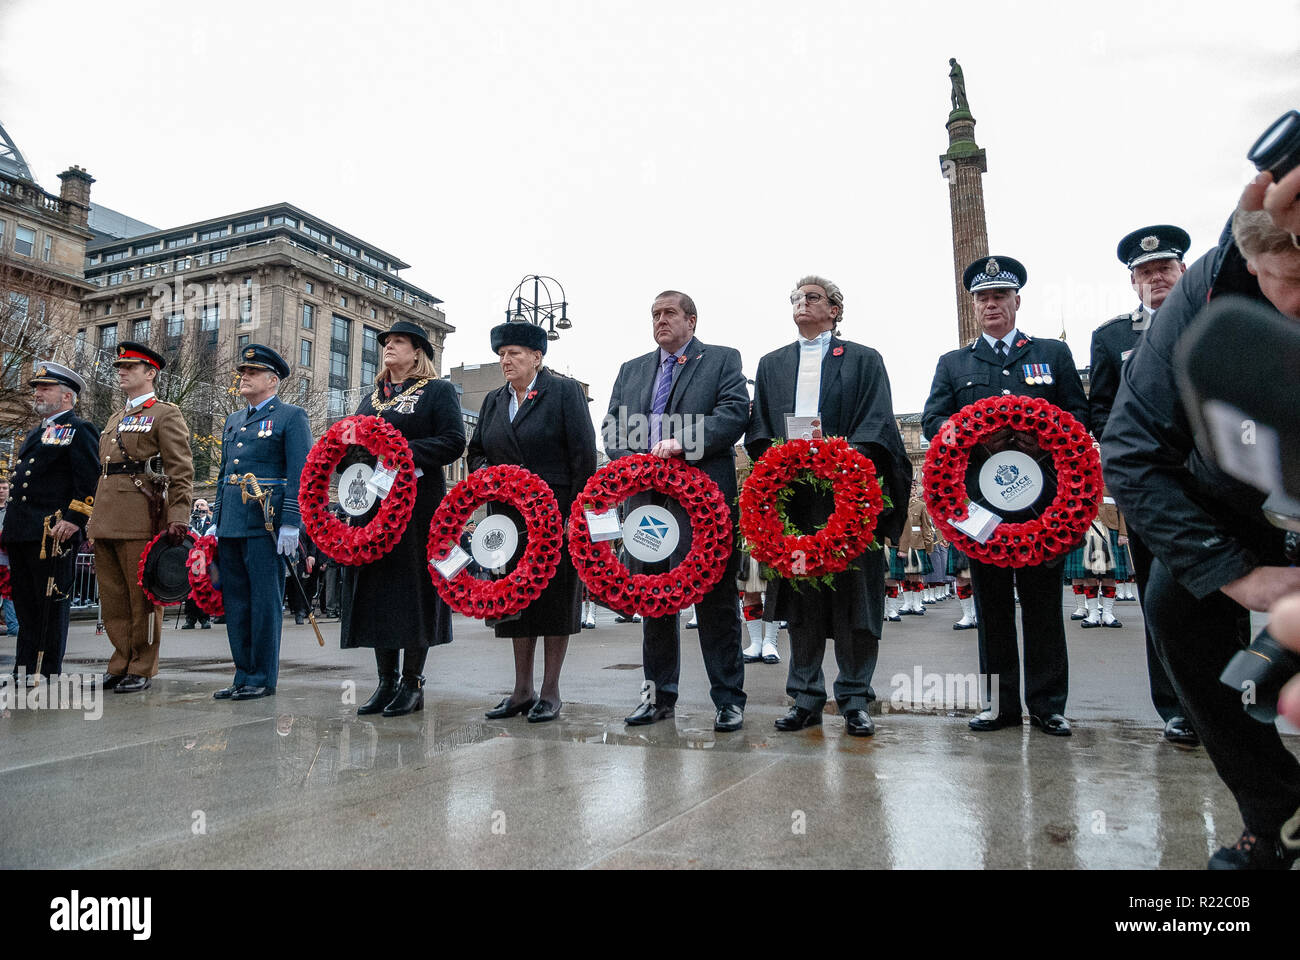 High ranking officials from various services and forces are seen standing before the Cenotaph with wreaths to pay their respects to those who have fallen.  Members of the UK armed forces, Police Scotland, Public and other services came out in support and to pay respects to those that have fallen in recent conflicts and to those that fell during the Great War. 2018 marked the 100th Year anniversary of WW1. Stock Photo